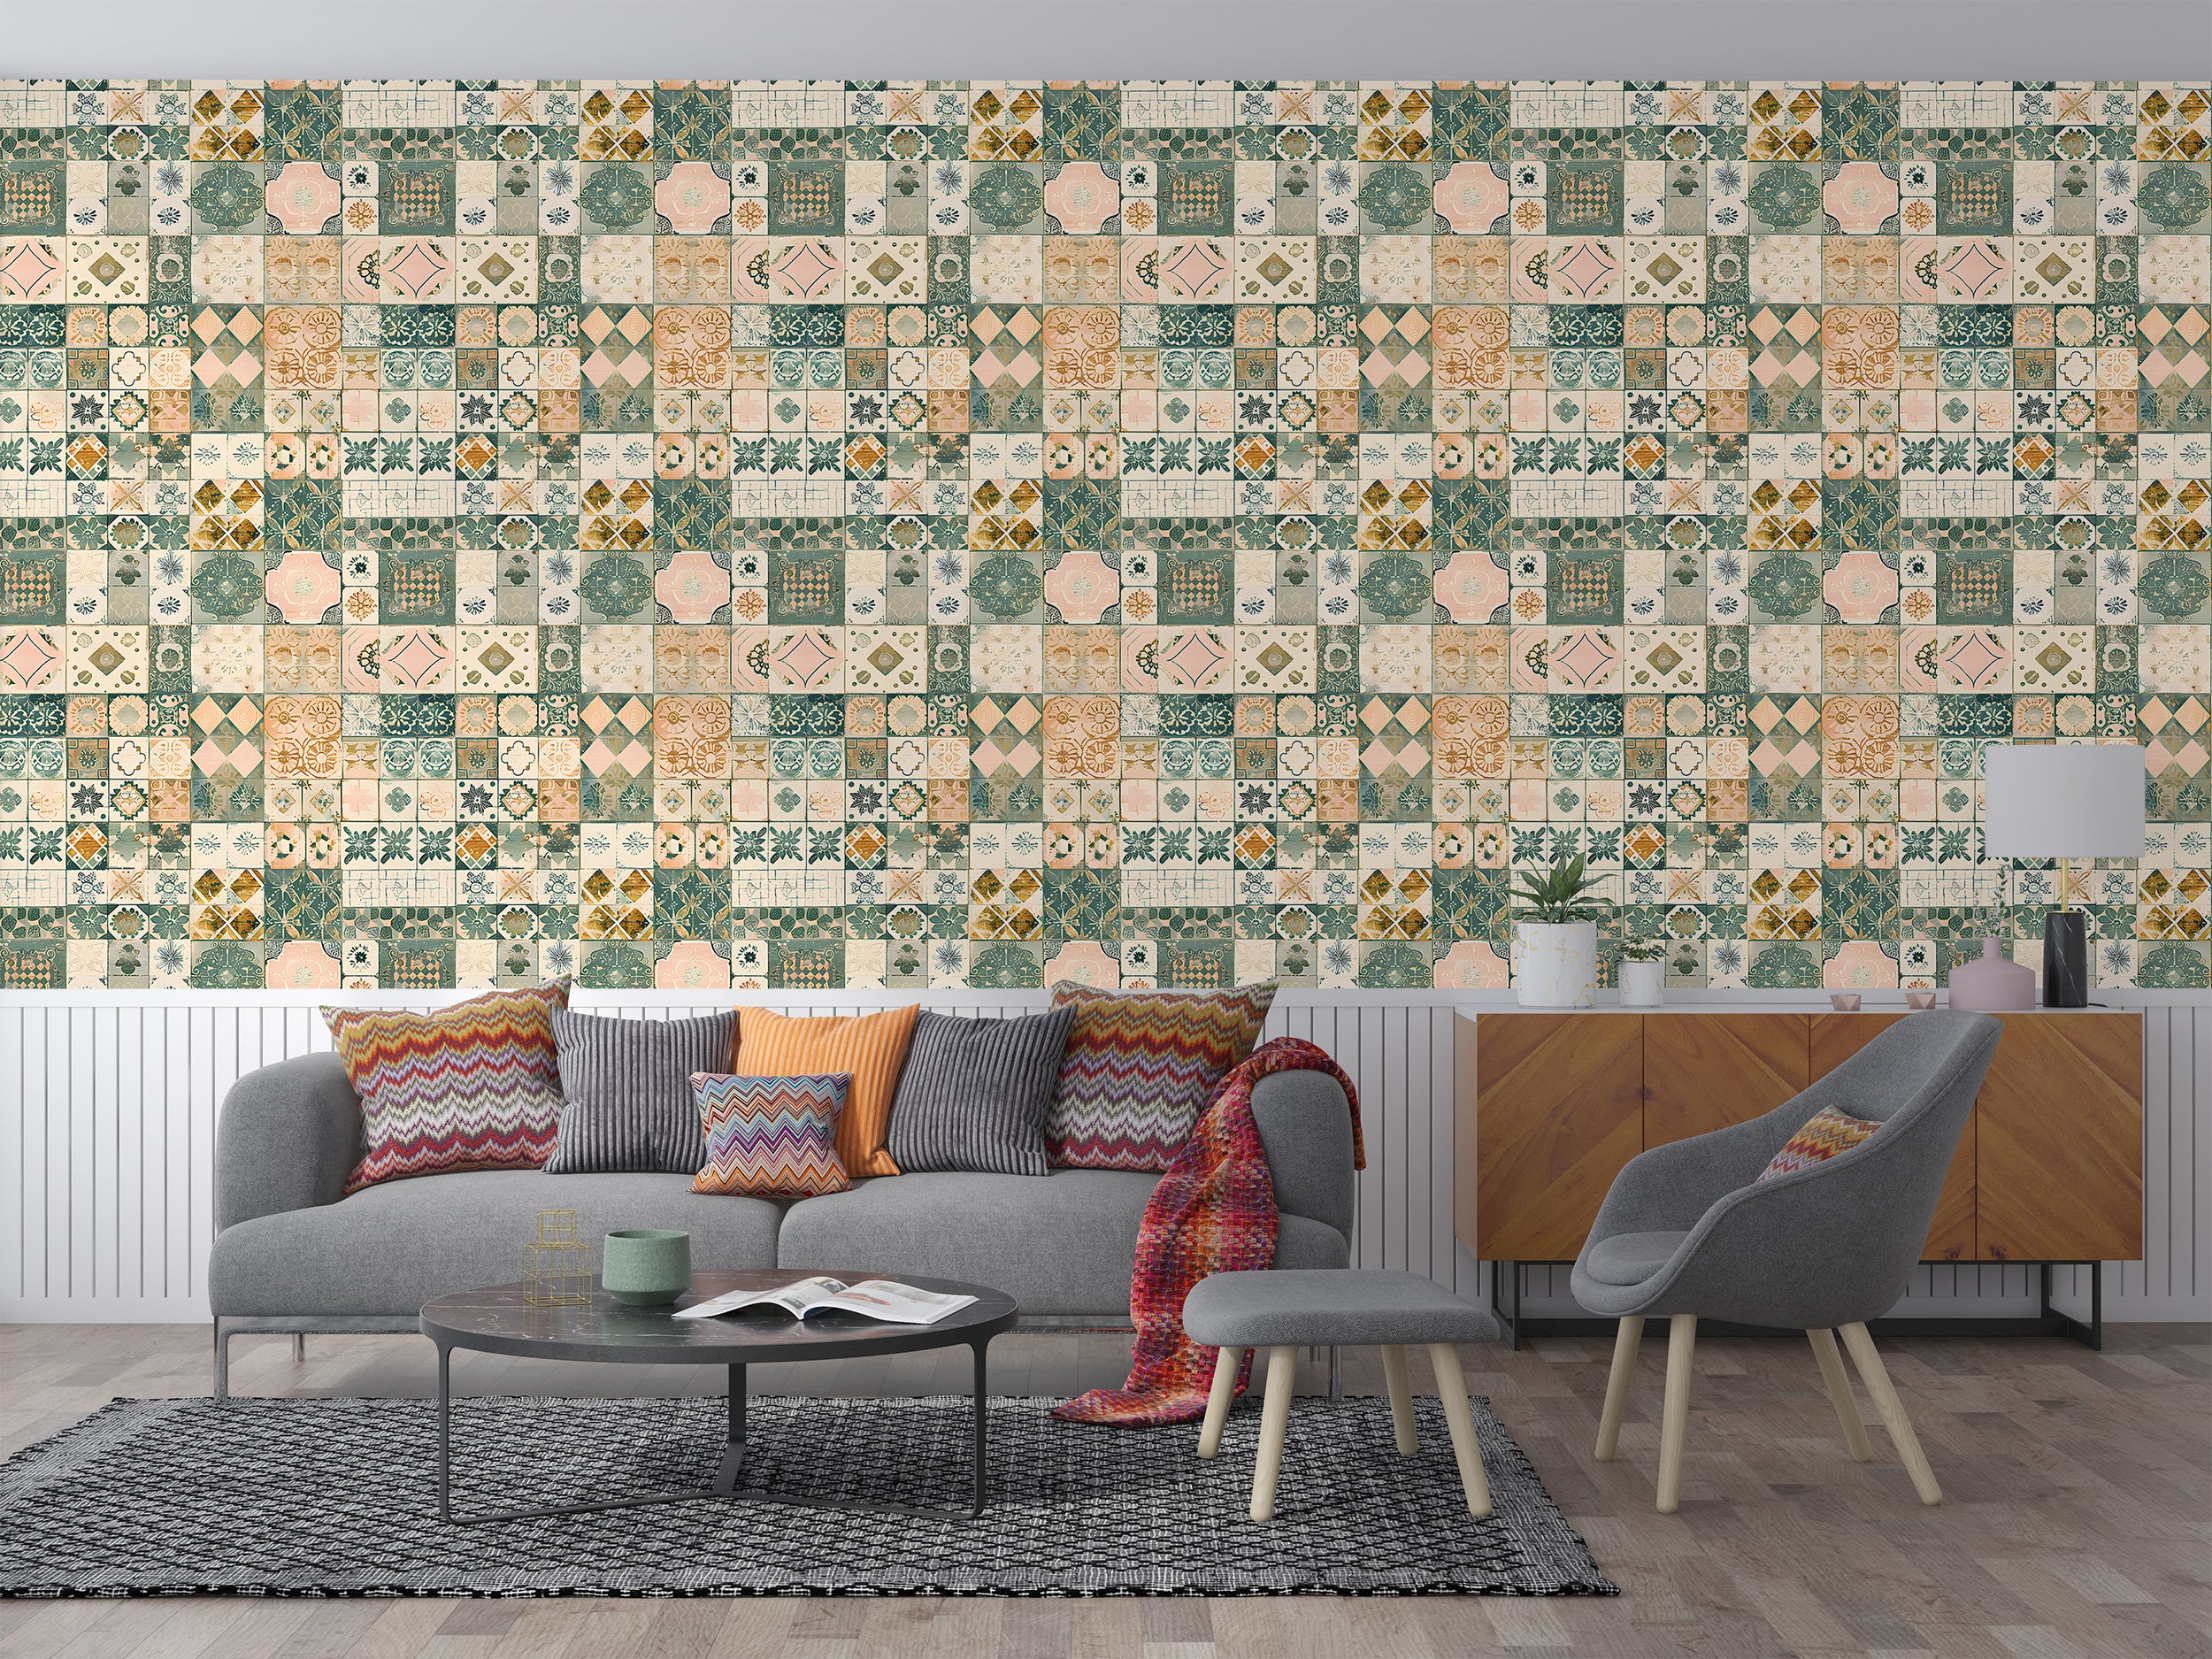 Moroccan Wallpaper, Patchwork Tiles Wallpaper, Green and Beige Tiles Wall Decal, Peel and Stick Watercolor Rustic Tiles Decor